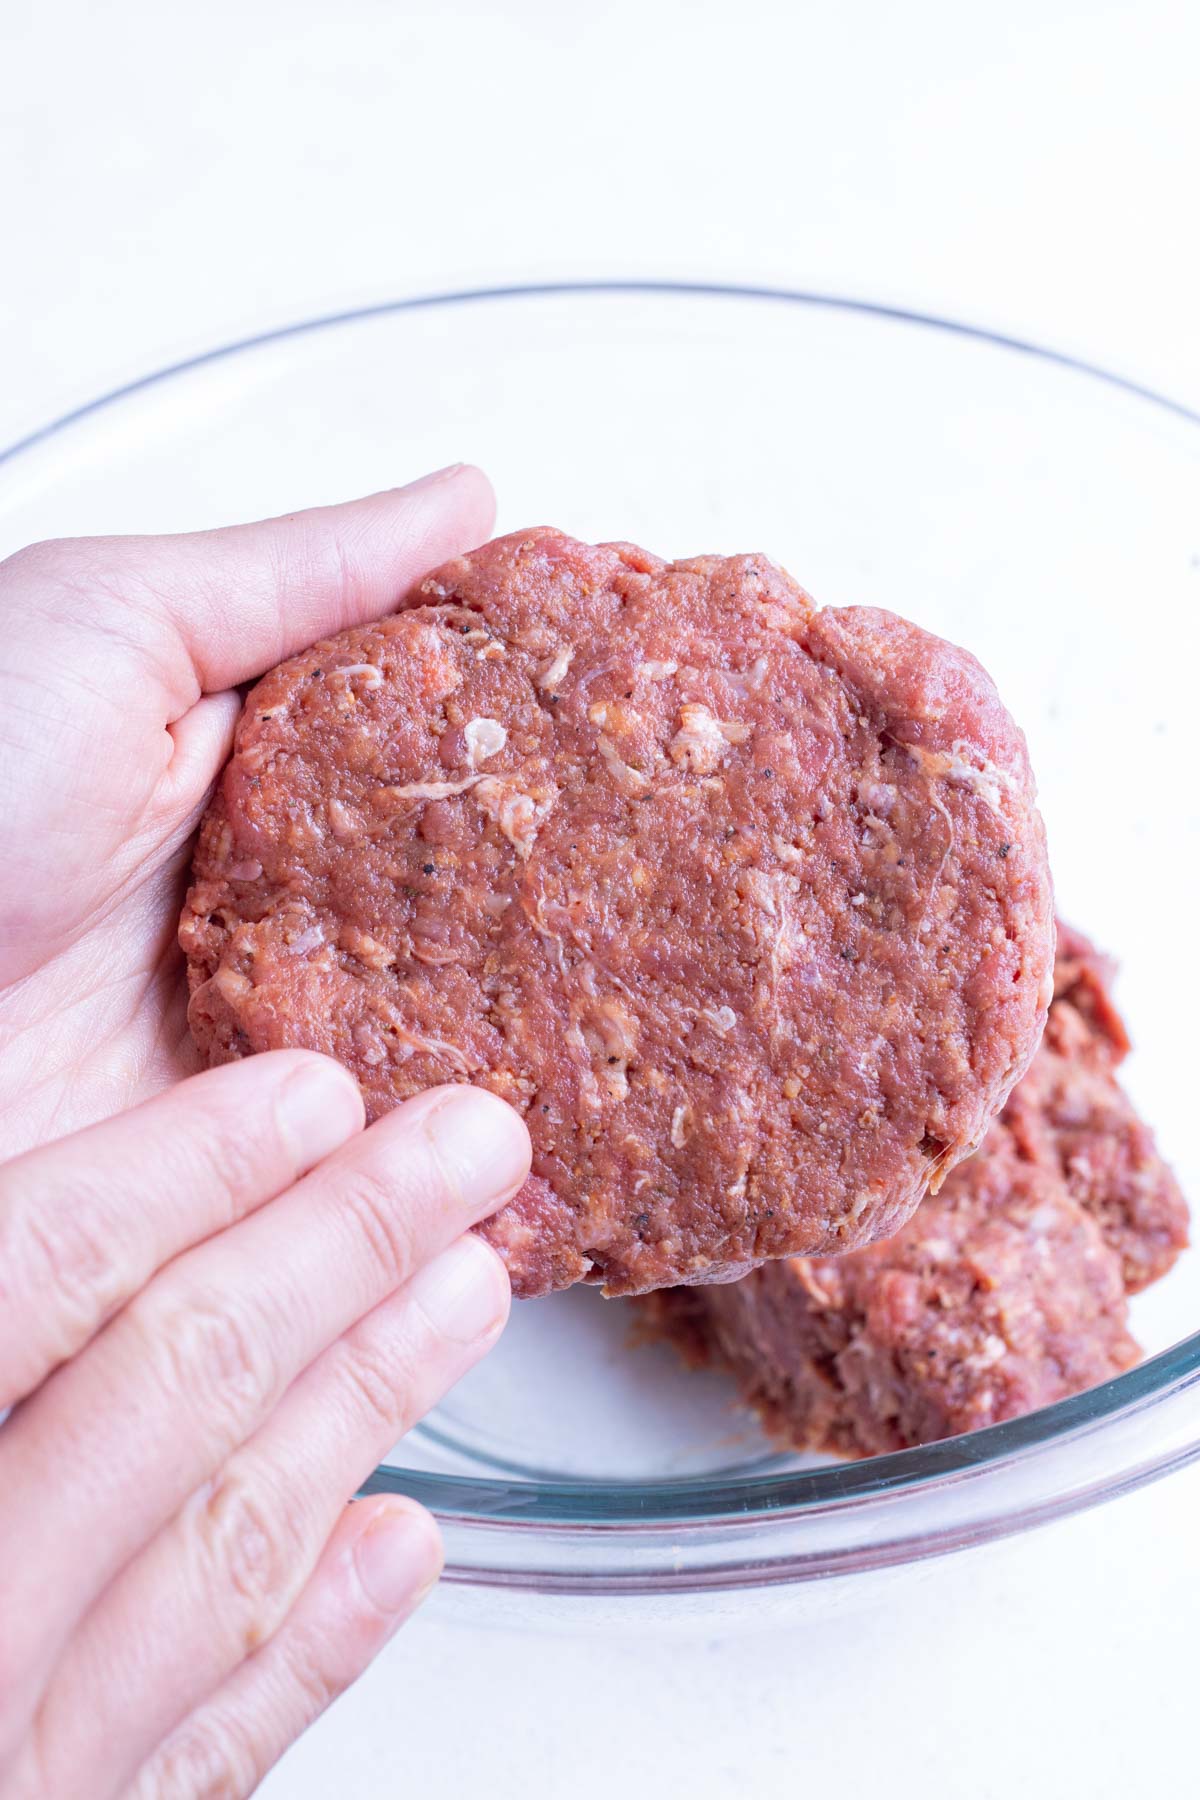 Meat is formed into patties using your hands.